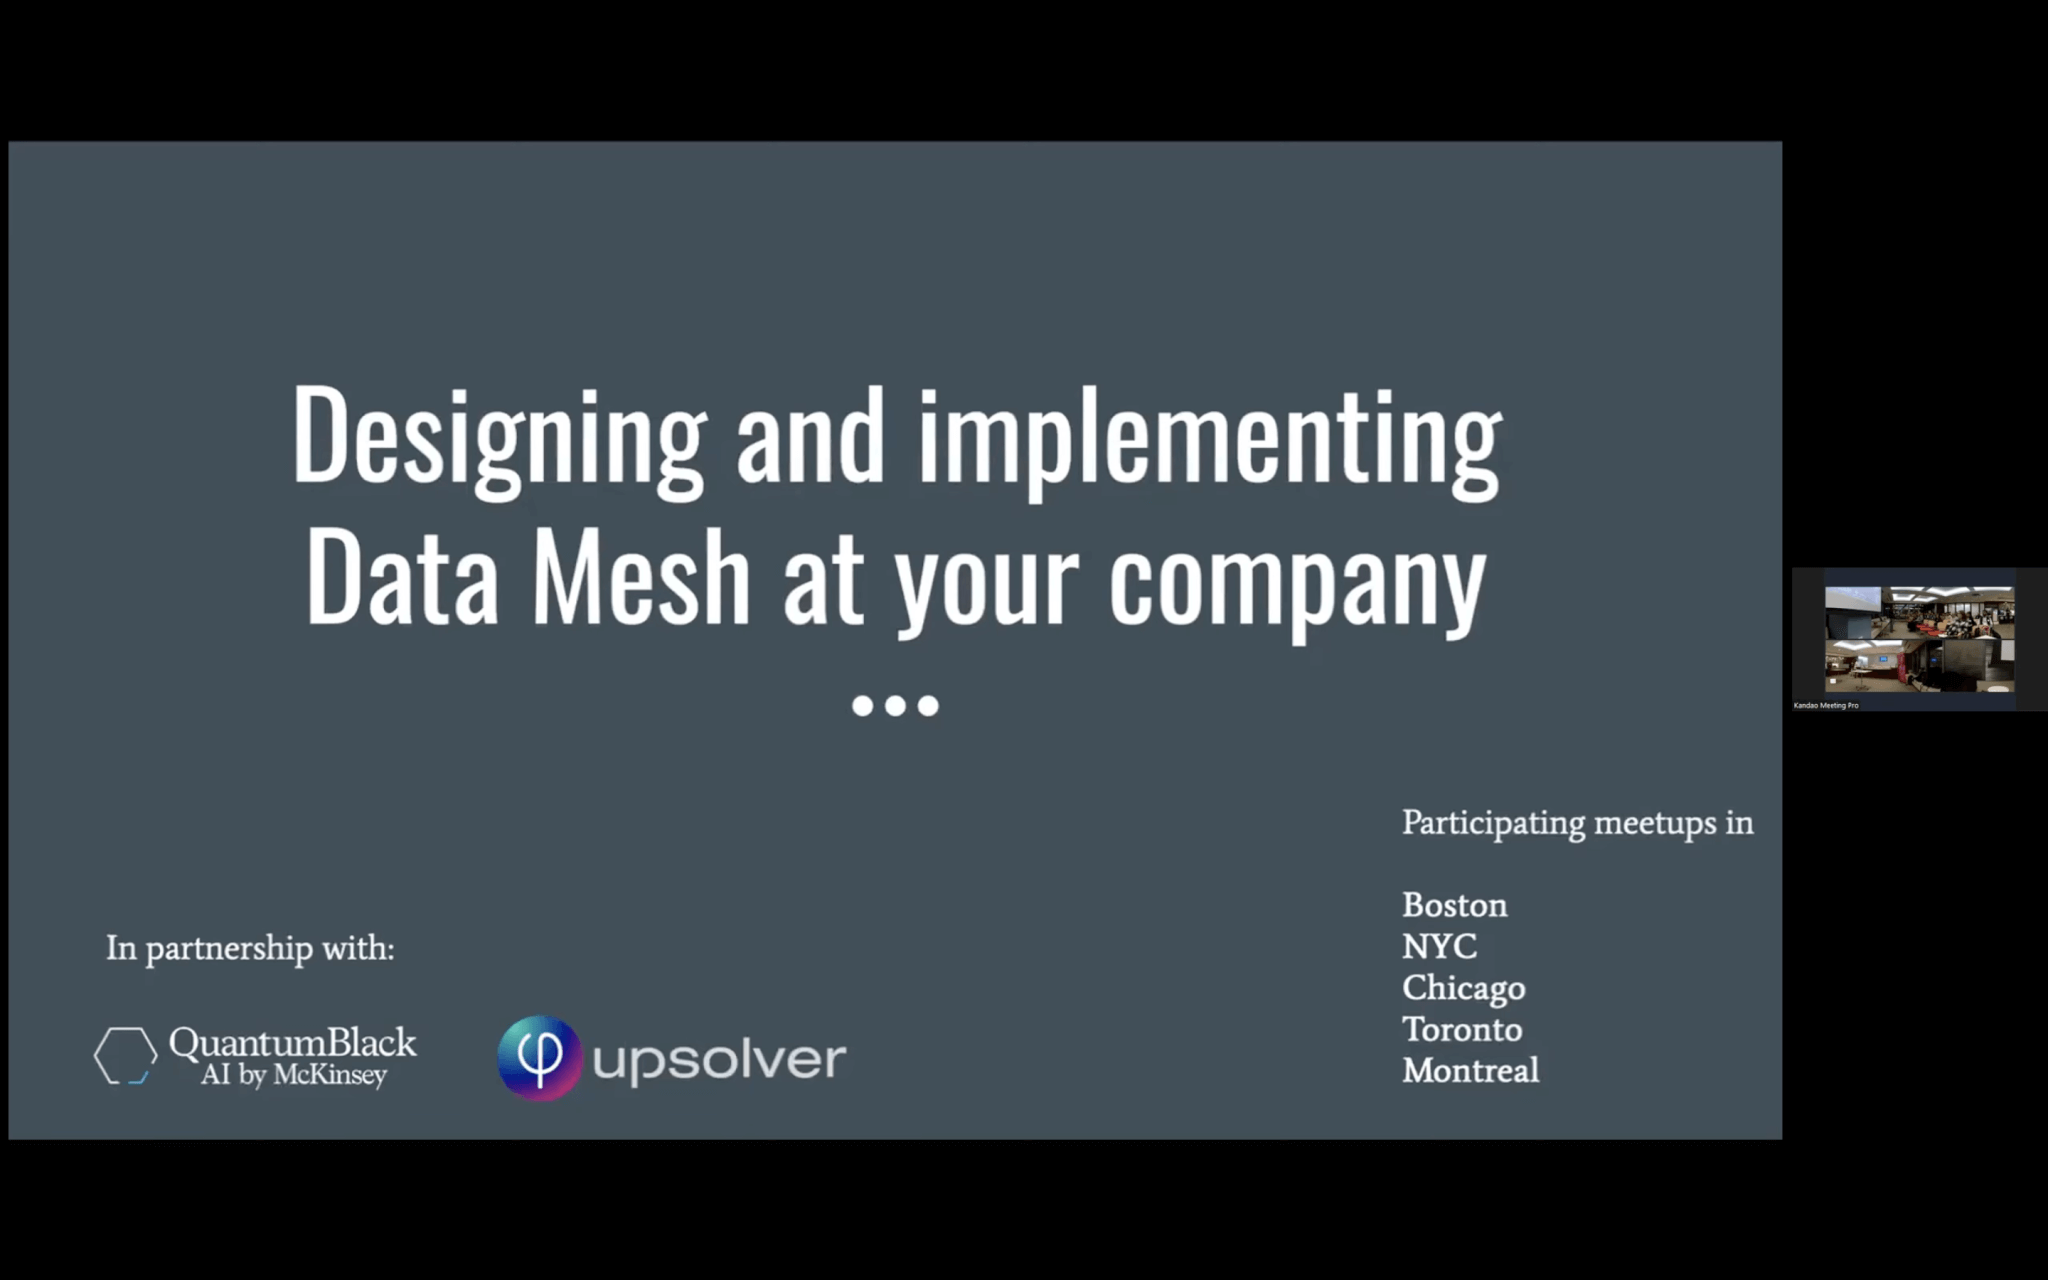 Designing and Implementing Data Mesh